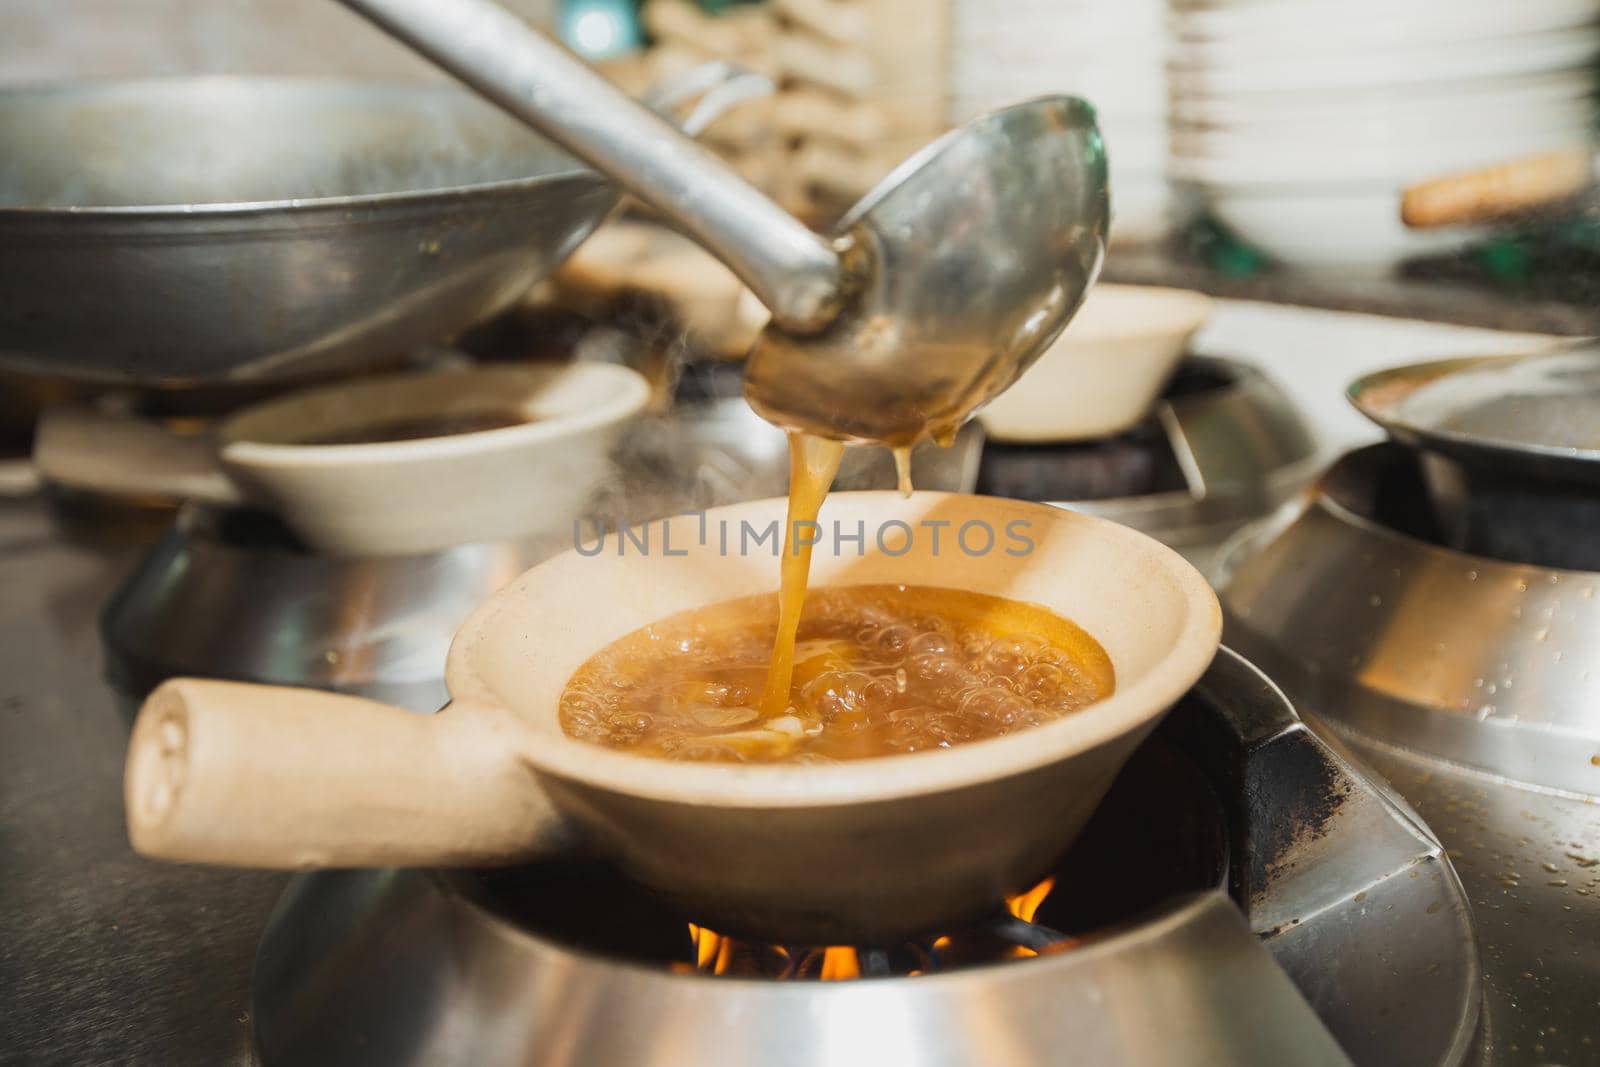 Boiling shark's fin soup by Wasant